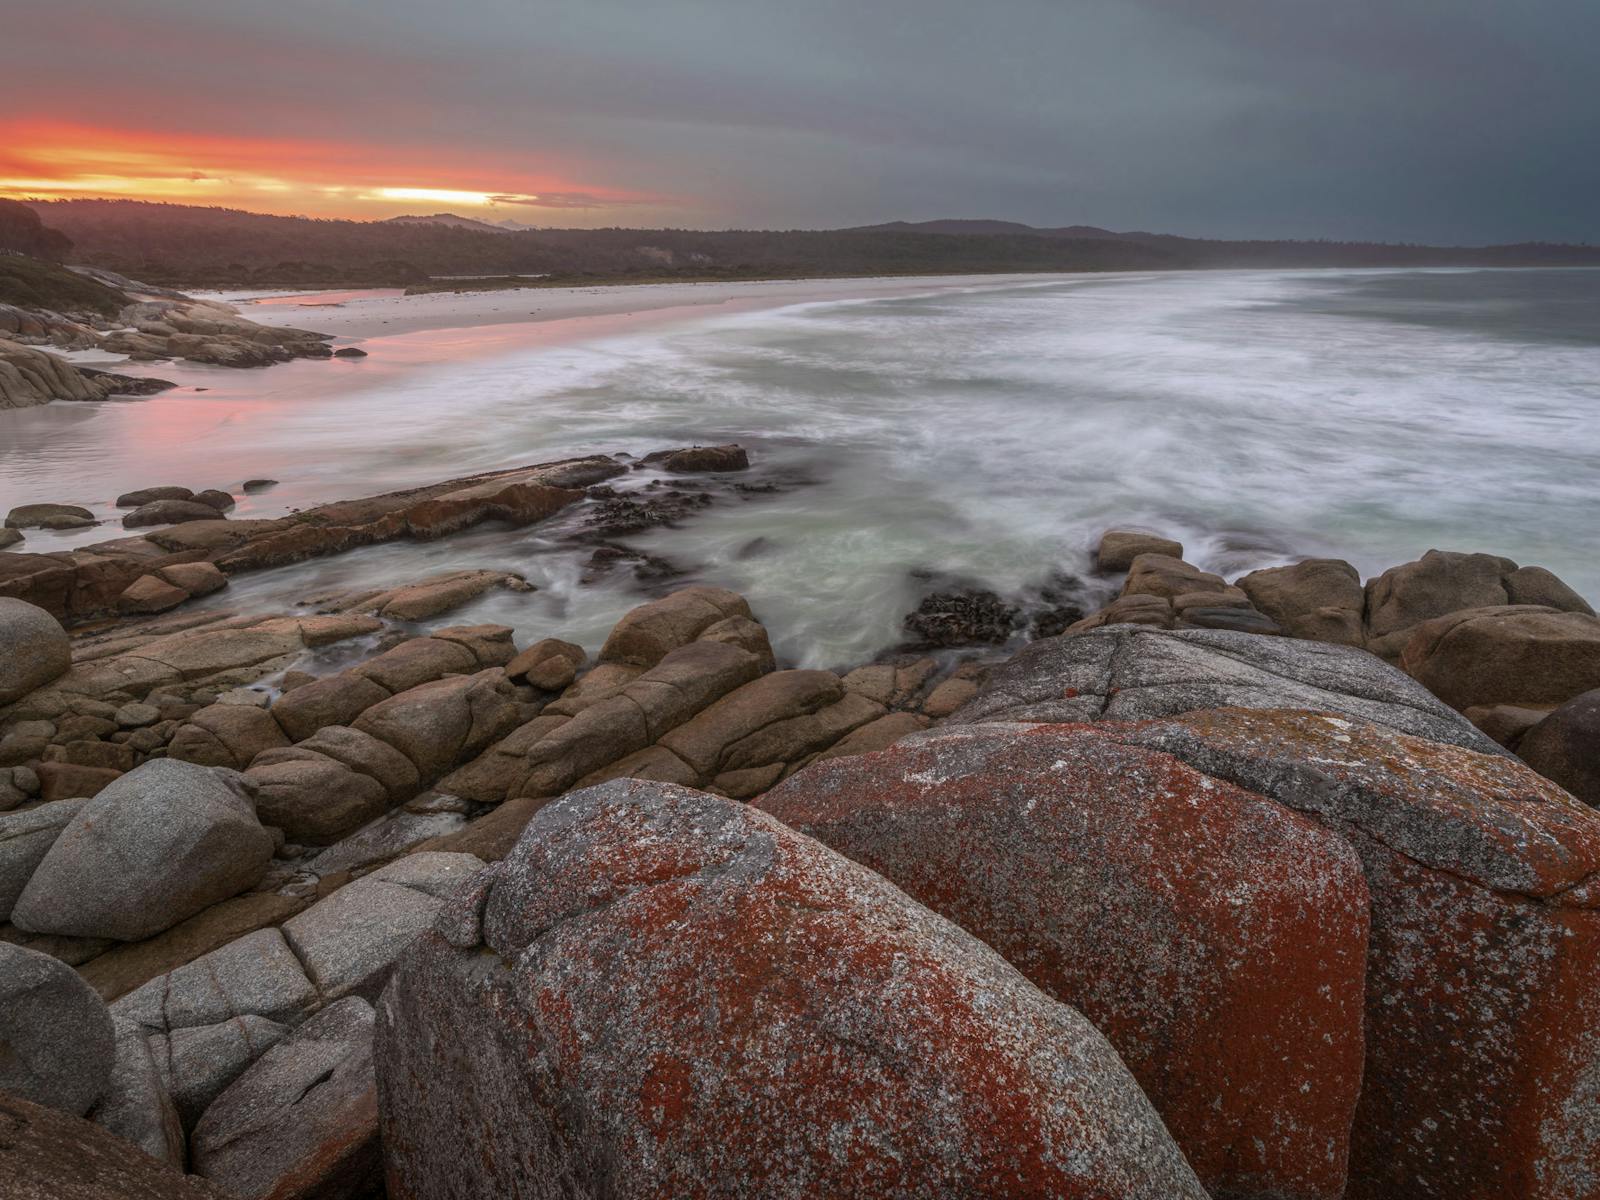 Sunset, Bay of Fires. 3 day private photography workshop available on demand all year round